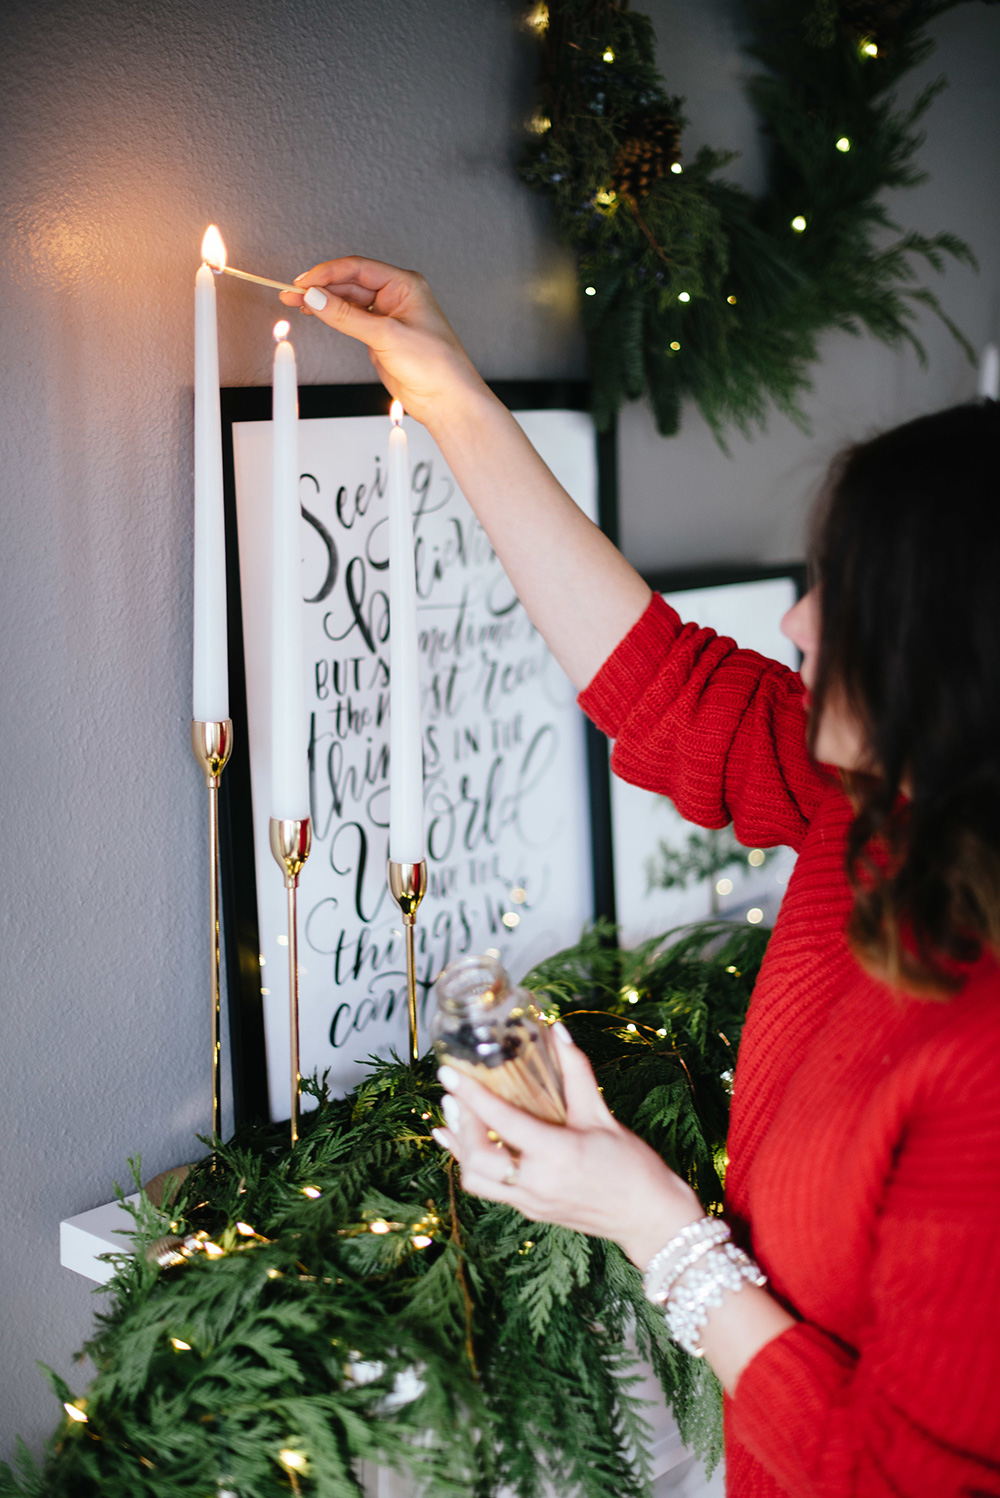 Beautiful Holiday Fireplace Styling By Krista Fredricks of Pike Petals using Lily & Val hand lettered prints